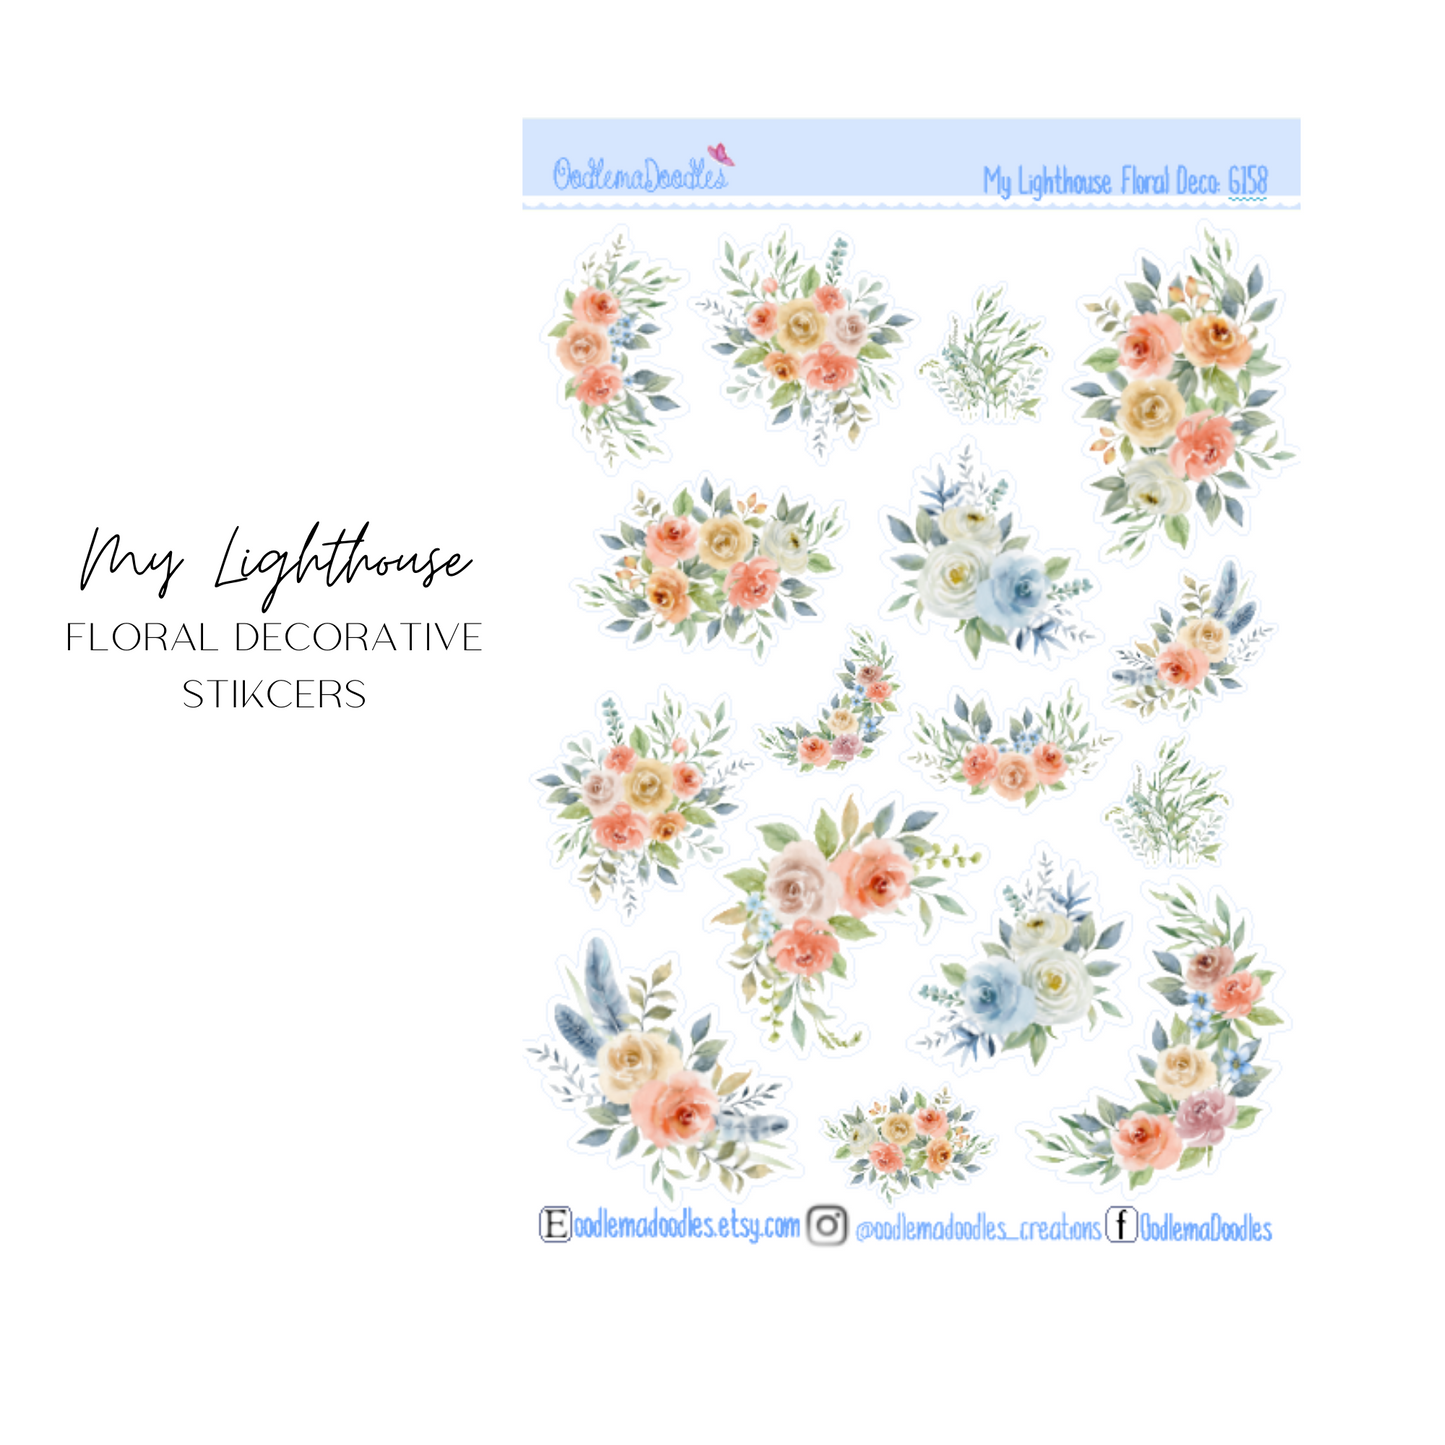 My Lighthouse Floral Decorative Stickers